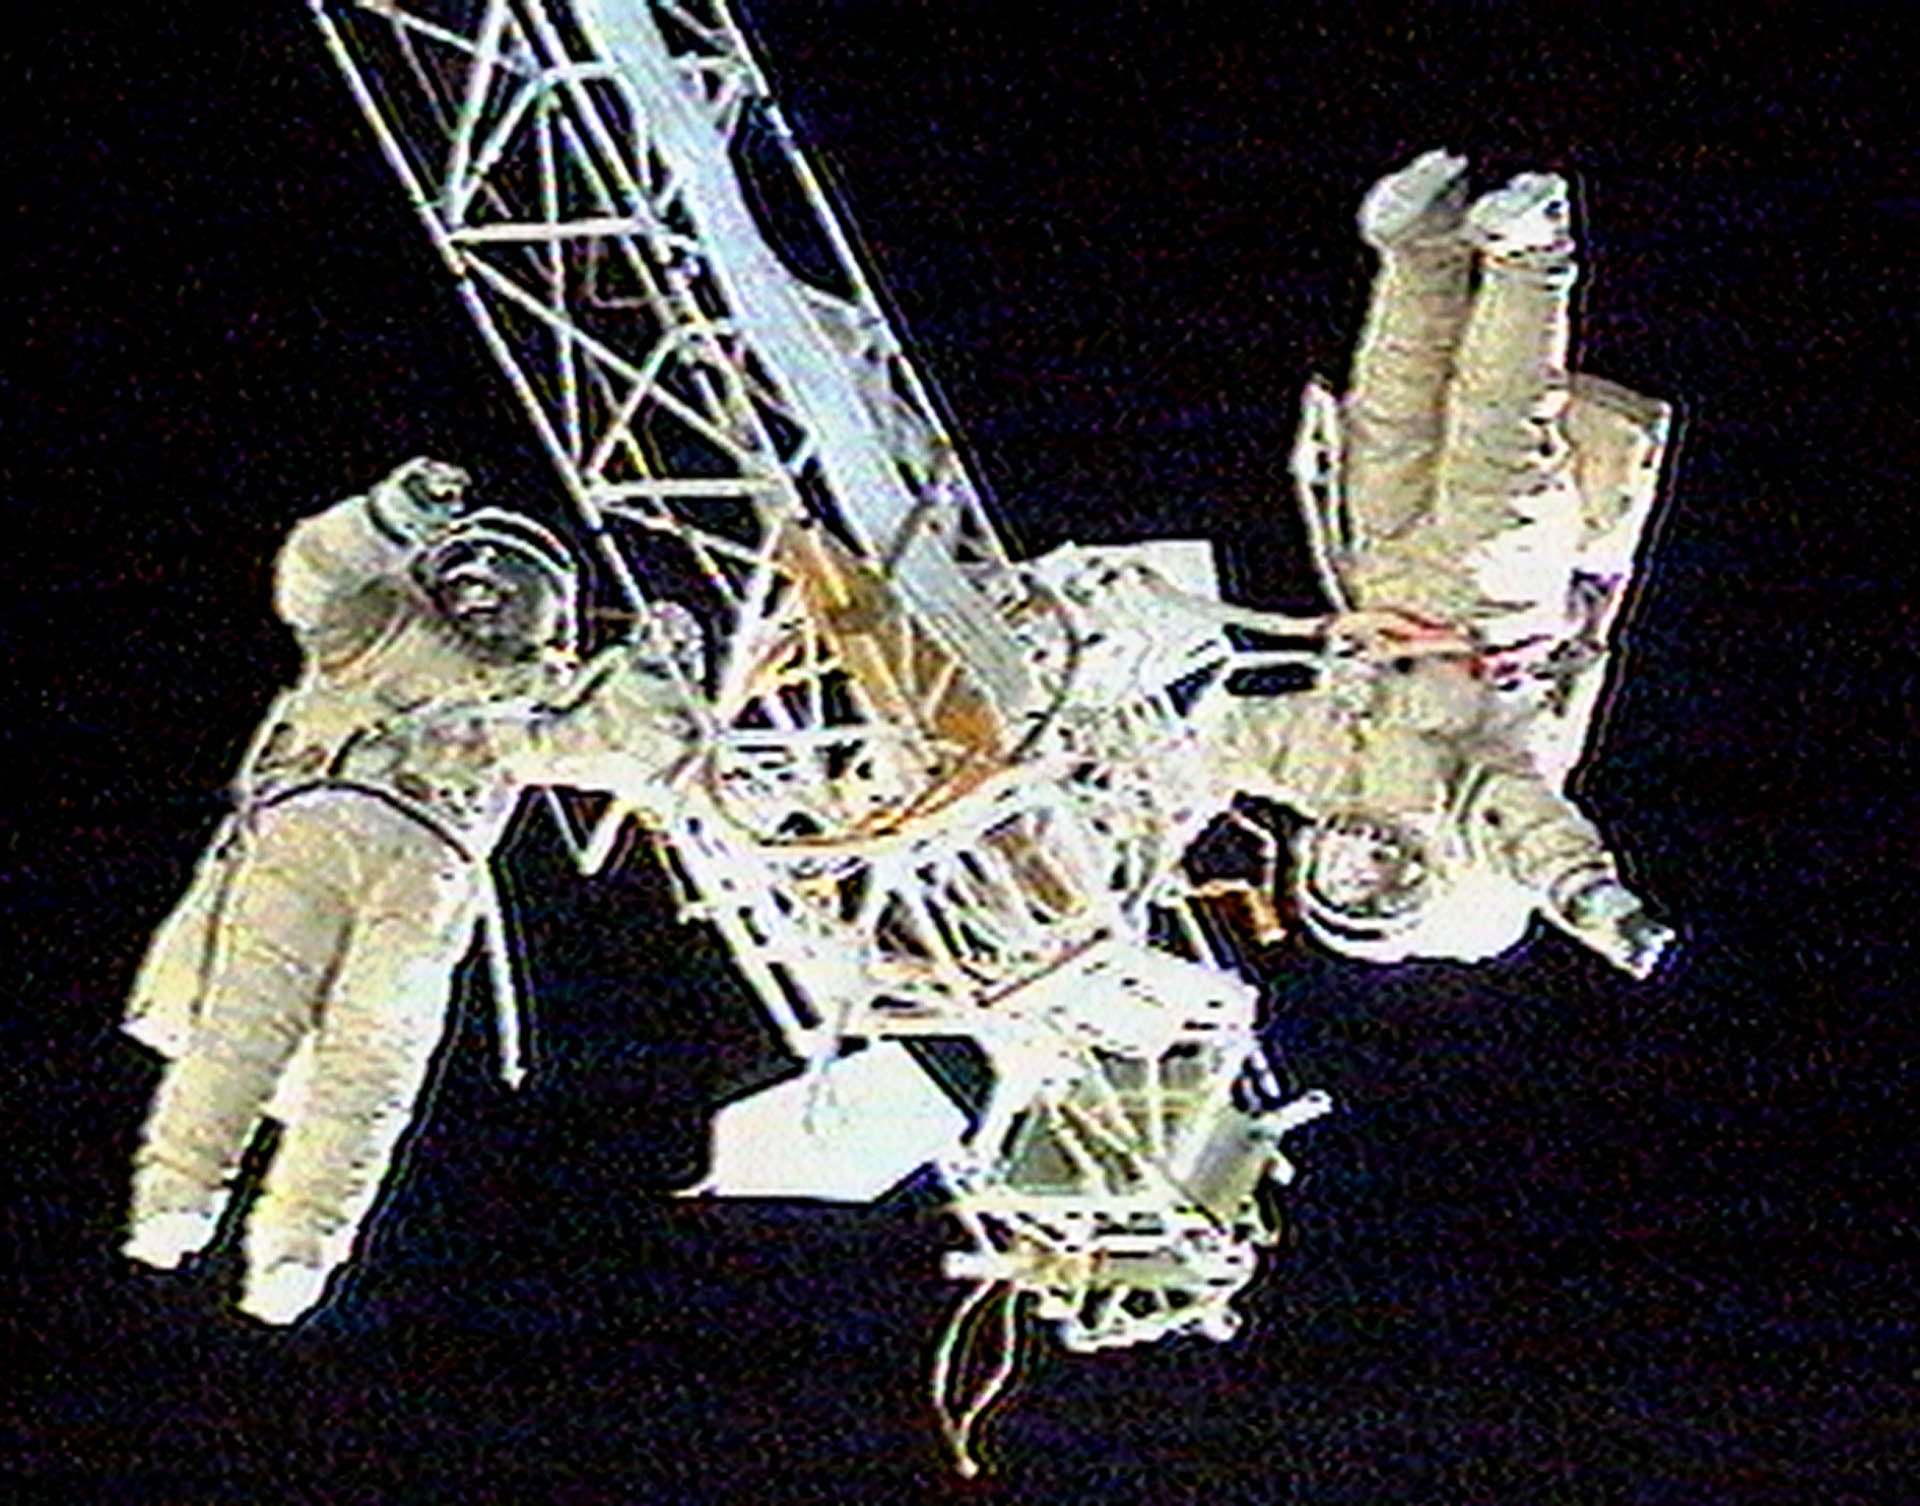 Two Russian cosmonauts hold on to a 14-meter girder outside the aging Mir station discarding a faulty thruster engine on April 11, 1998.